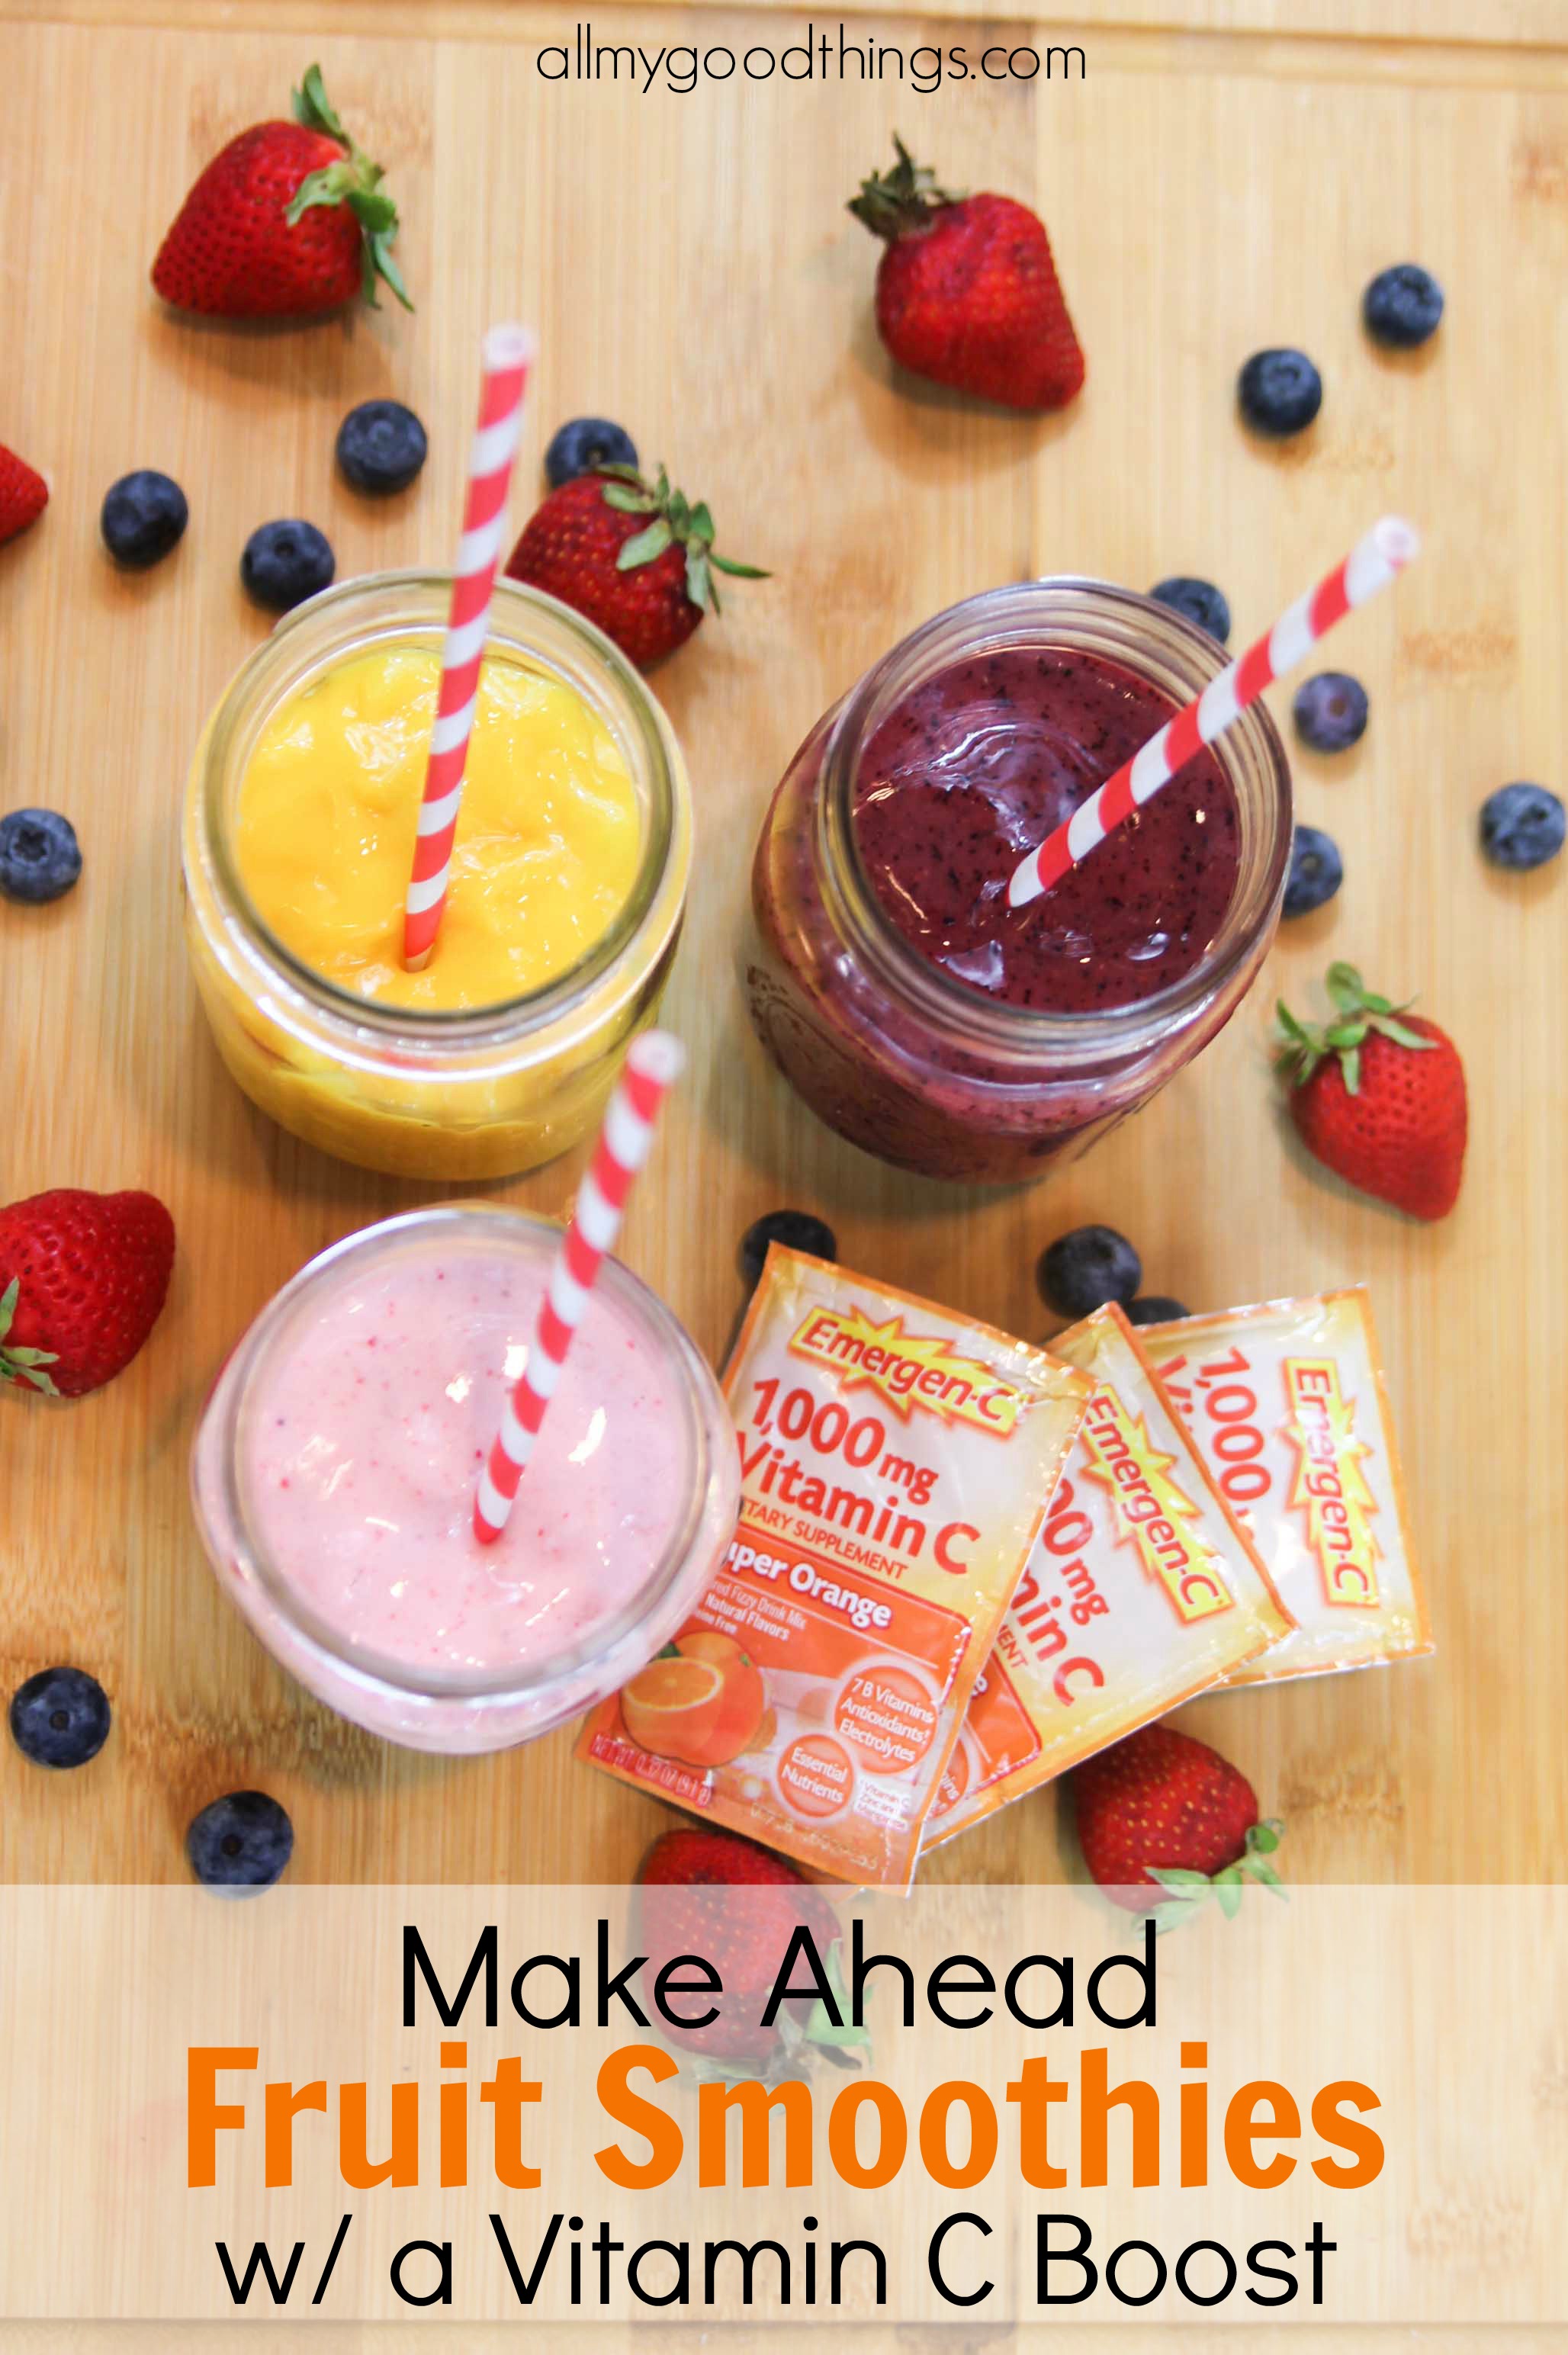 Make Ahead Fruit Smoothies with a Vitamin C Boost - All My Good Things